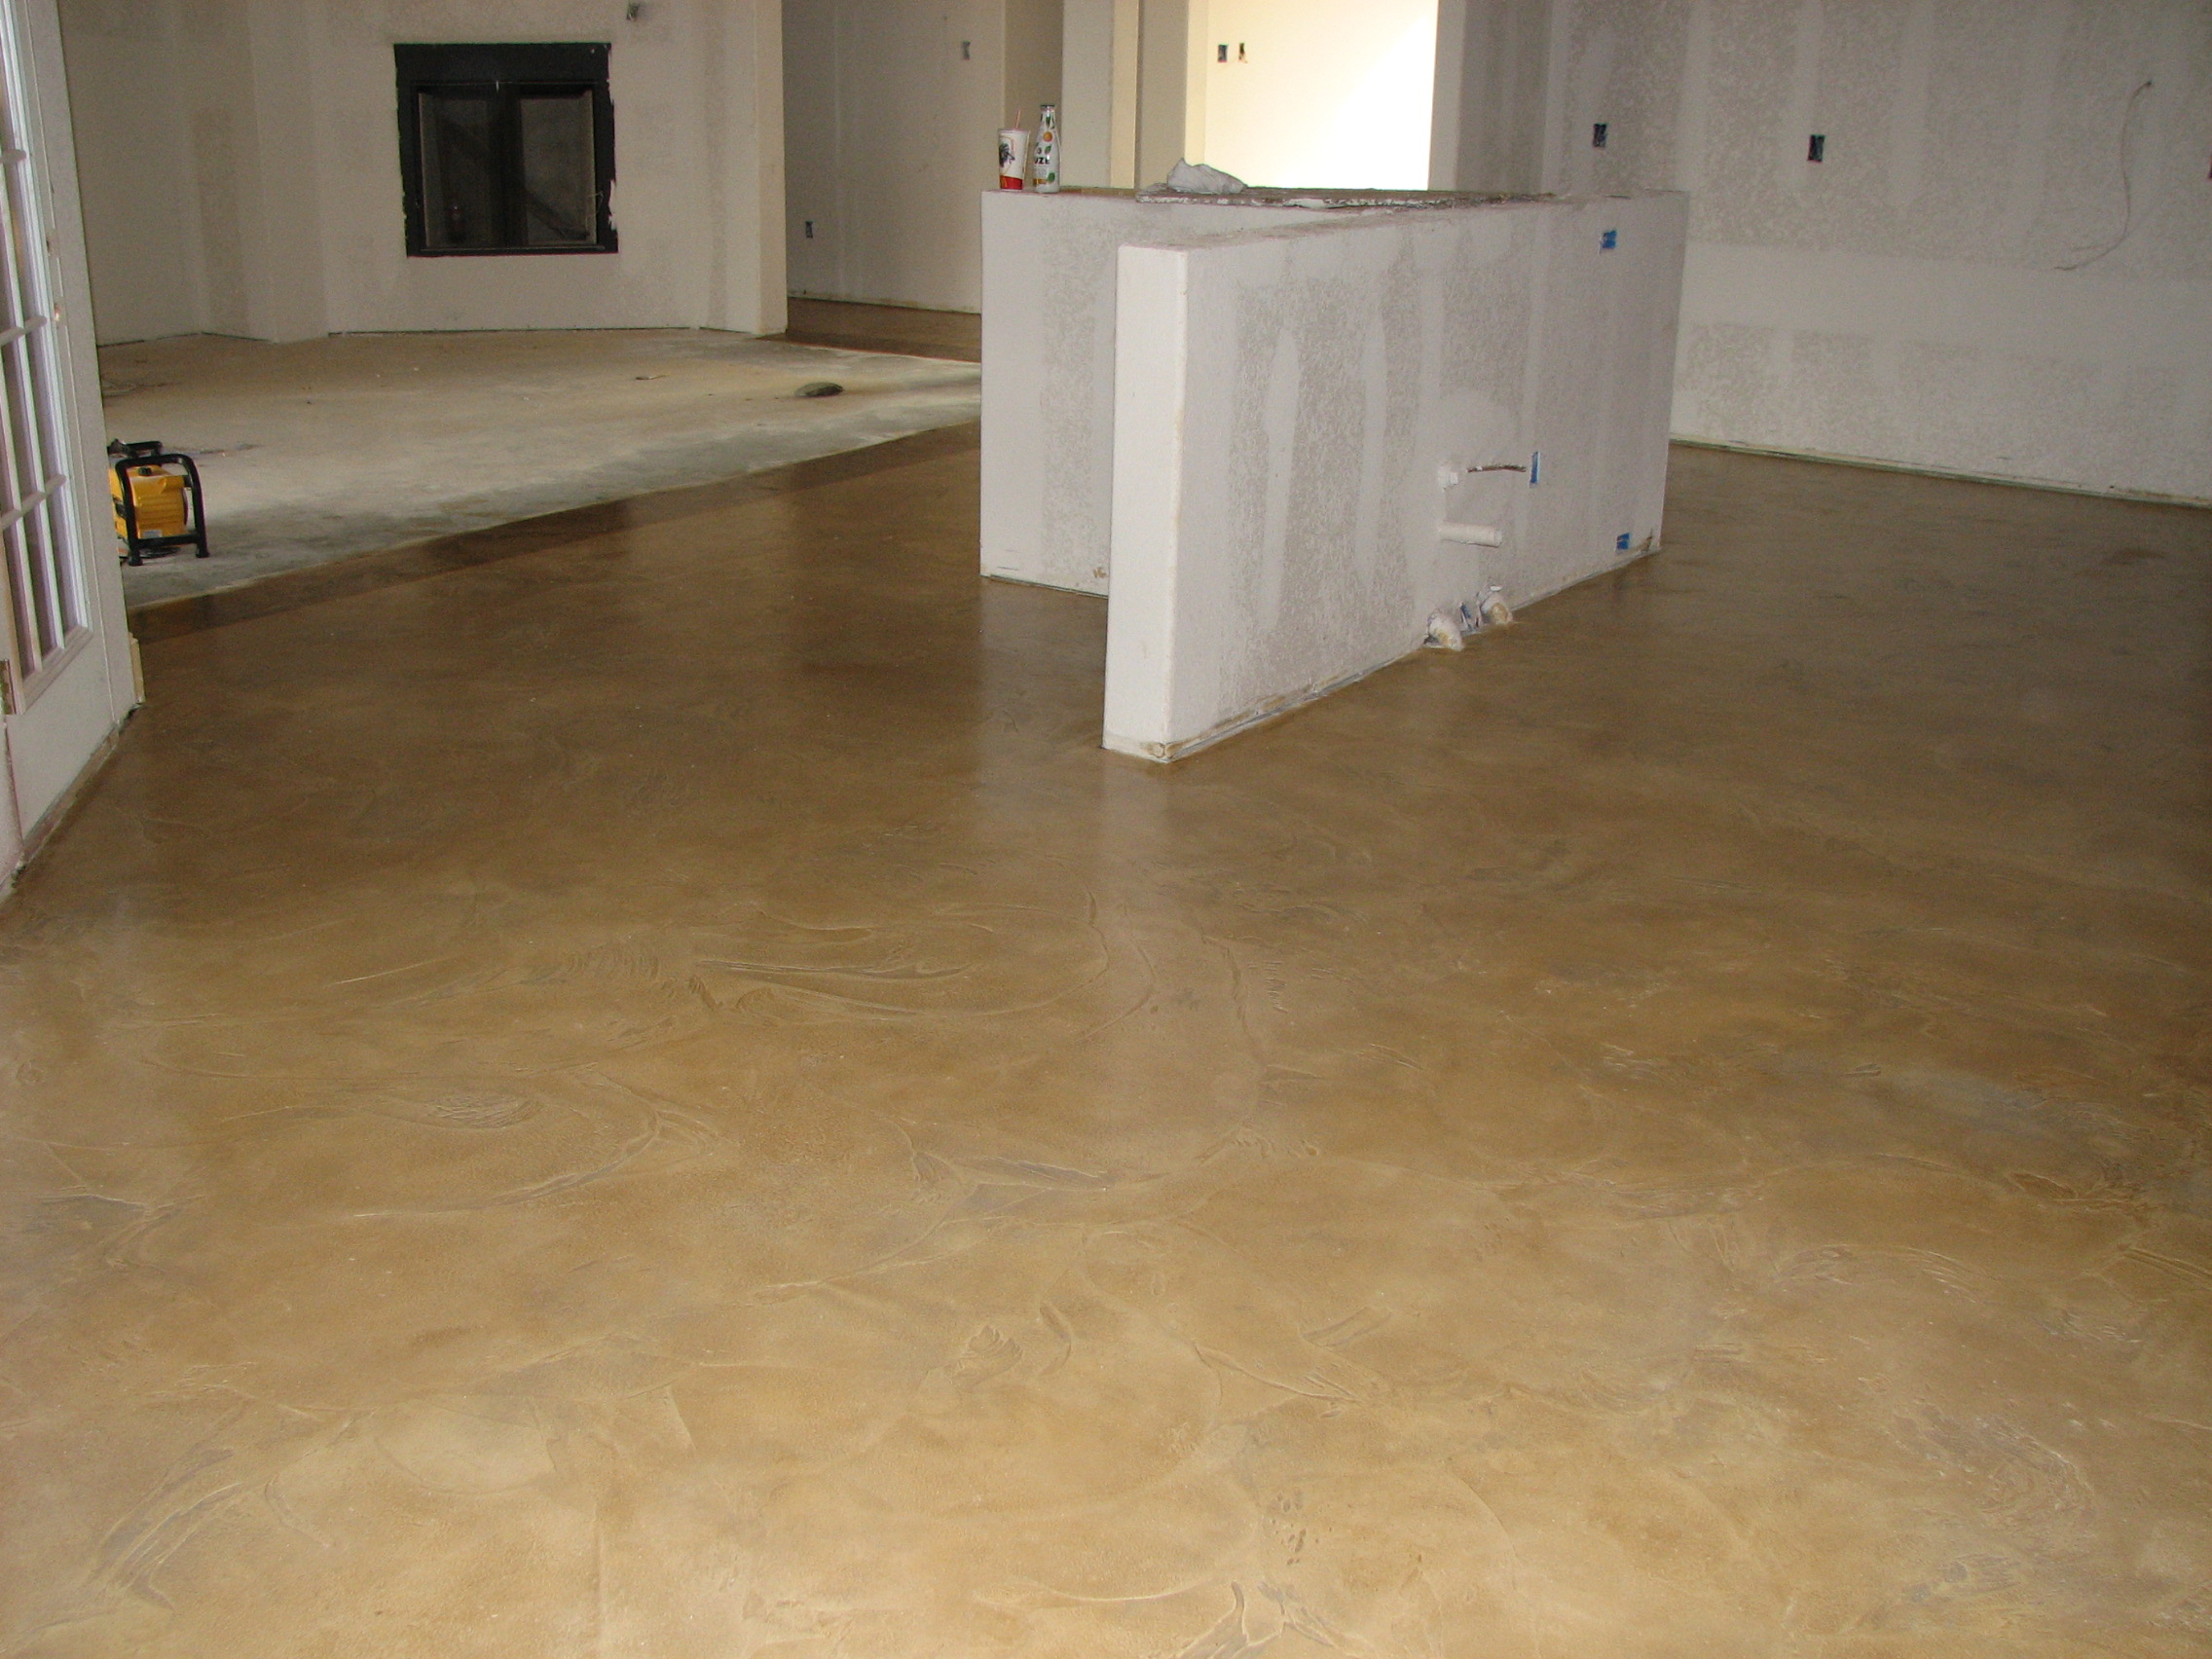 Stained concrete | Stained concrete, Flooring, Home